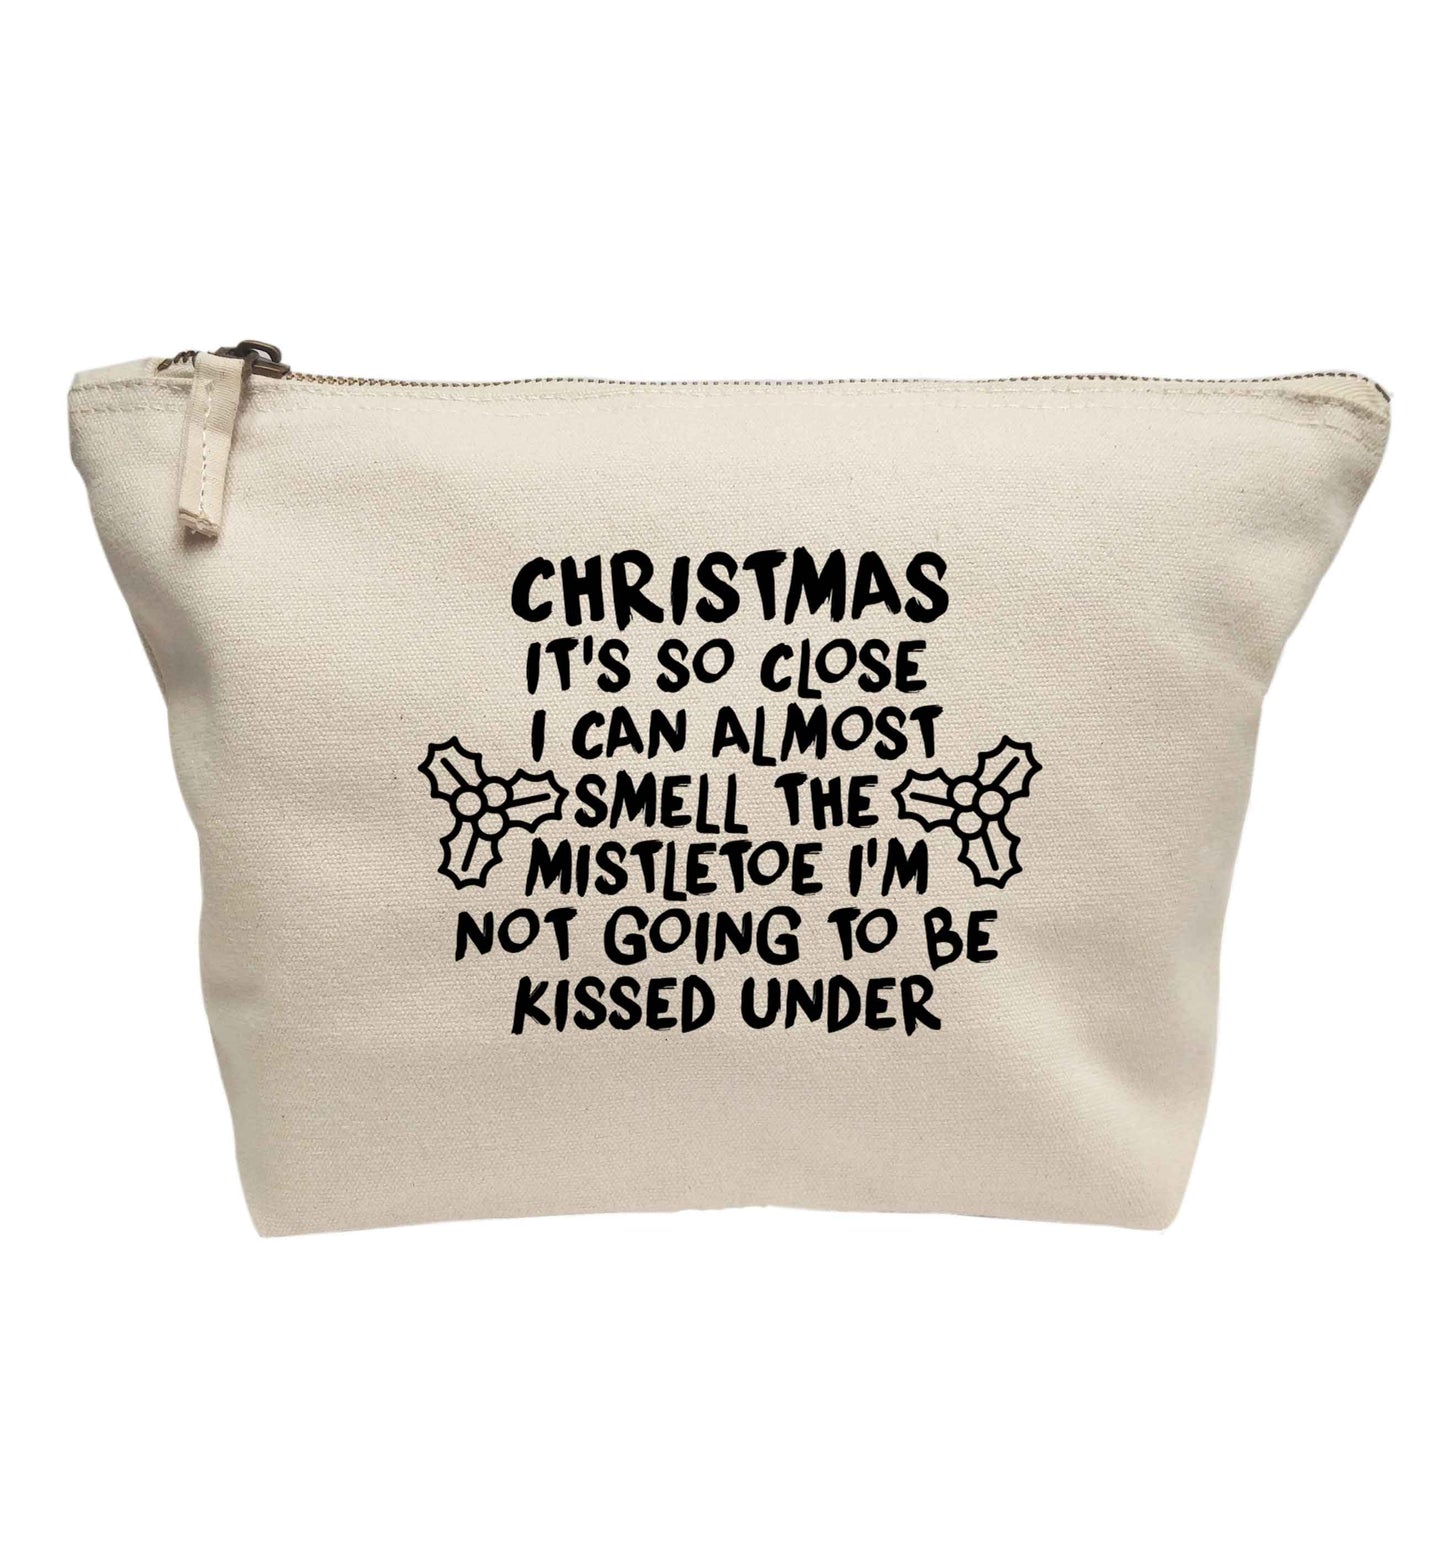 Christmas it's so close I can almost smell the misteltoe I'm not going to be kissed under | Makeup / wash bag